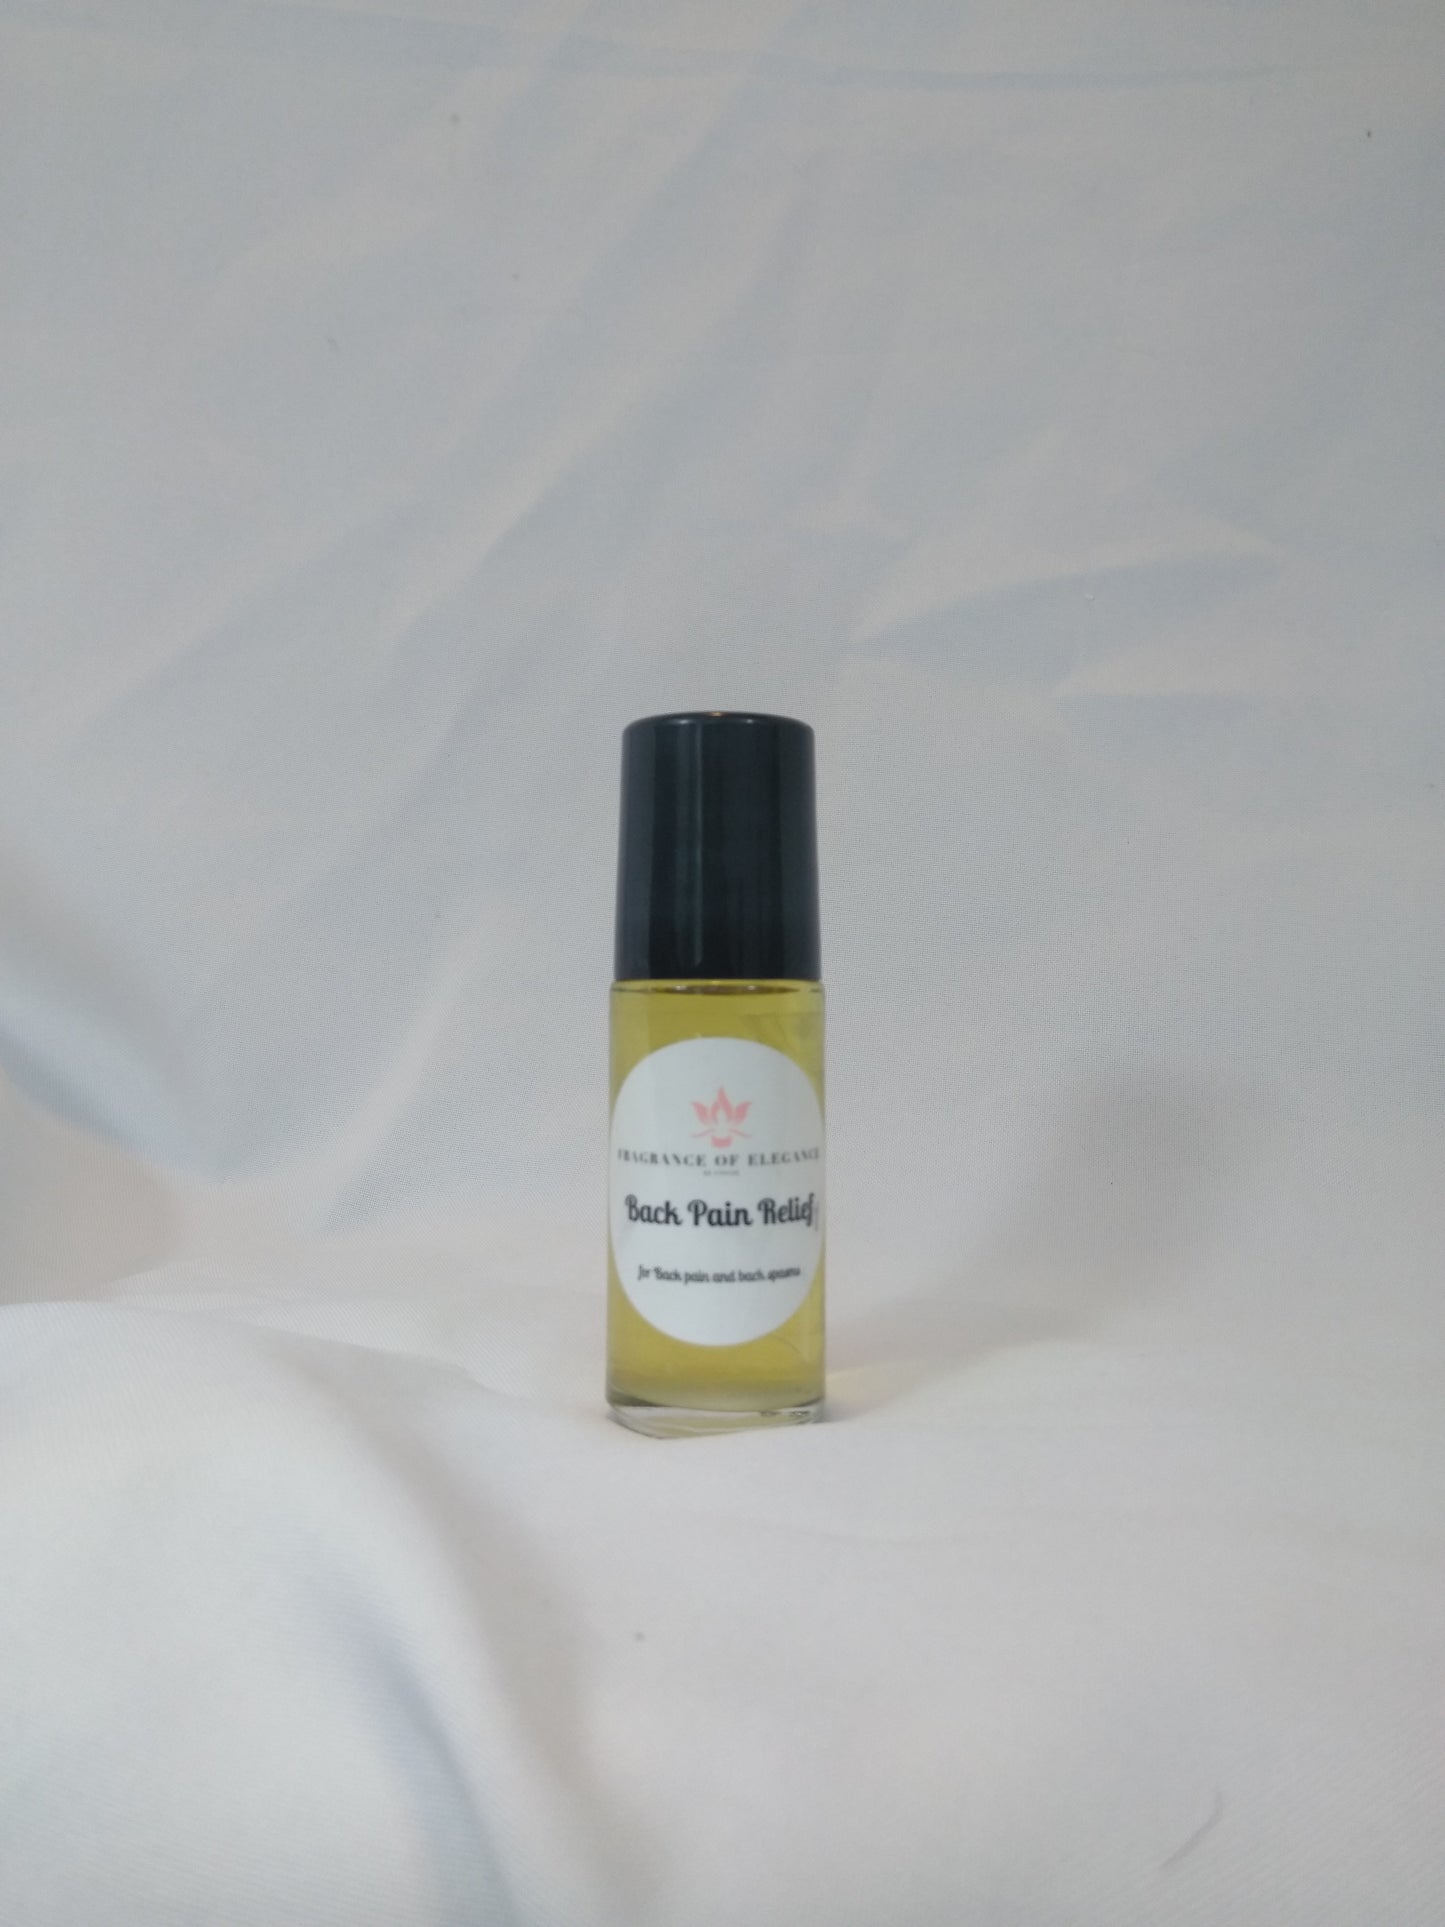 Back pain relief roll-on body oil - Fragrance of Elegance